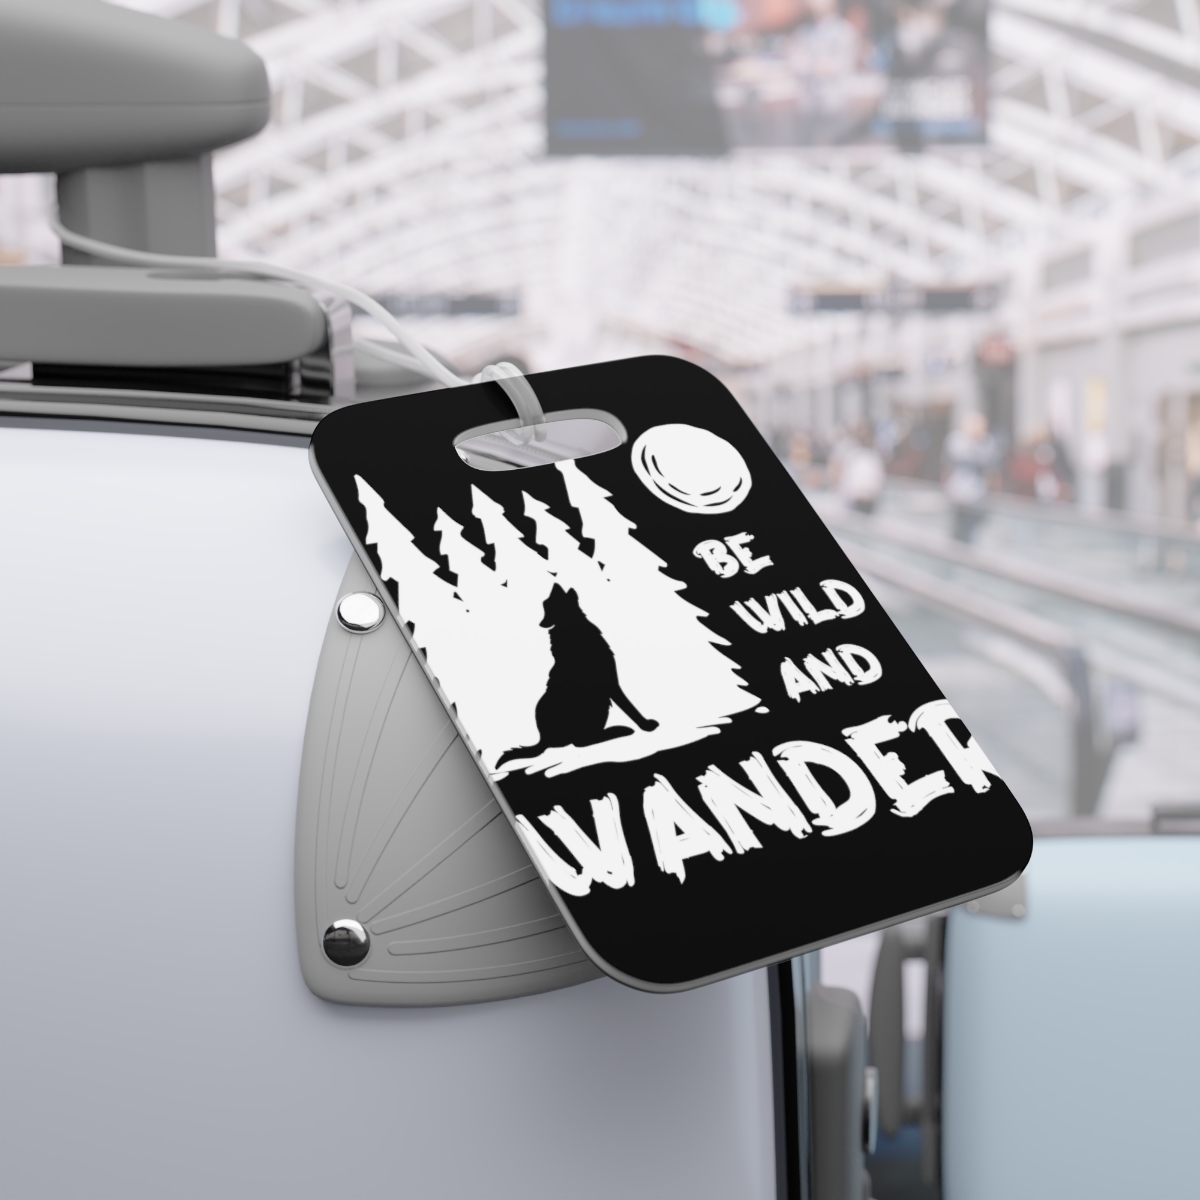 Primary image for Be Wild and Wander Luggage Tags for Adventure Enthusiasts - Durable Plastic with